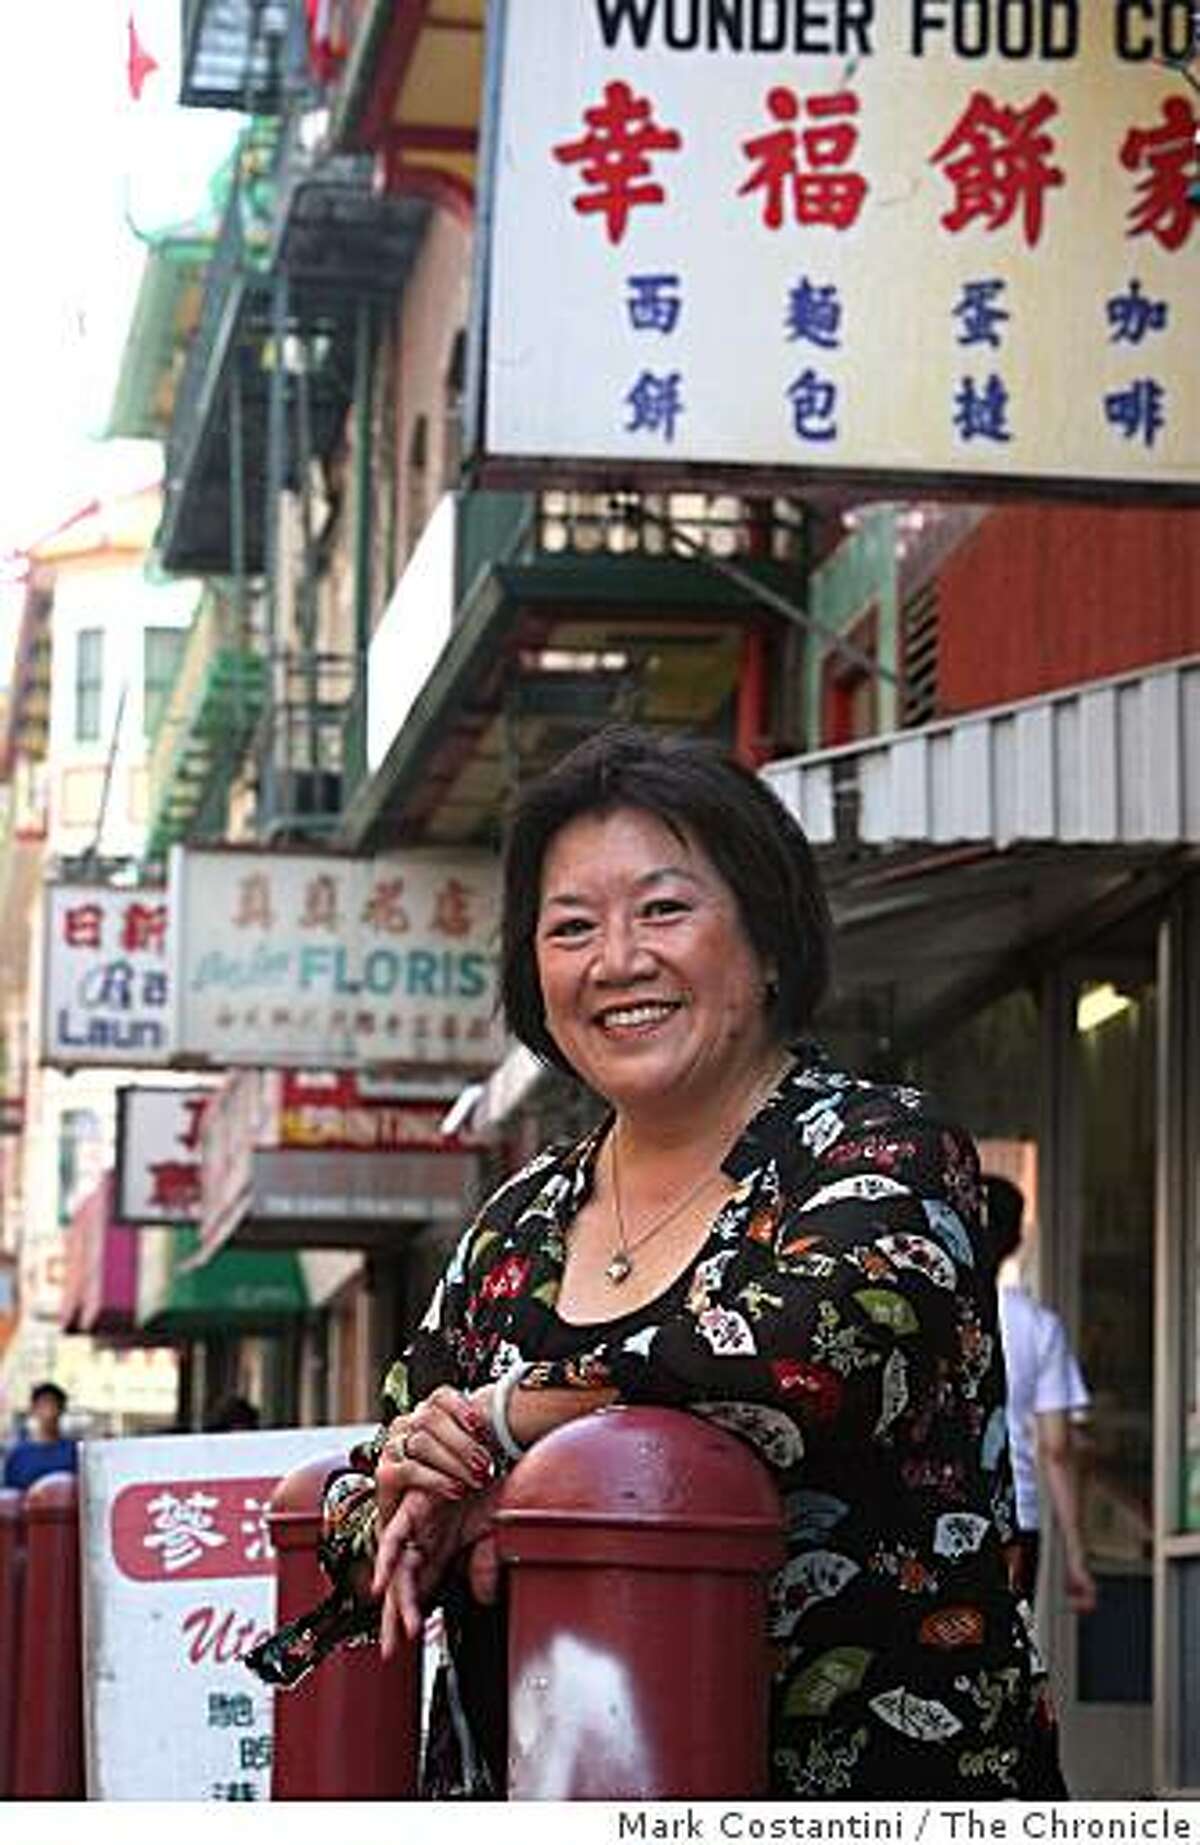 Shirley Fong-Torres, who has a new book: "The Woman Who Ate Chinatown." poses in Chinatown in San Francisco, Calif., on July 9, 2008. Photo by Mark Costantini / The Chronicle